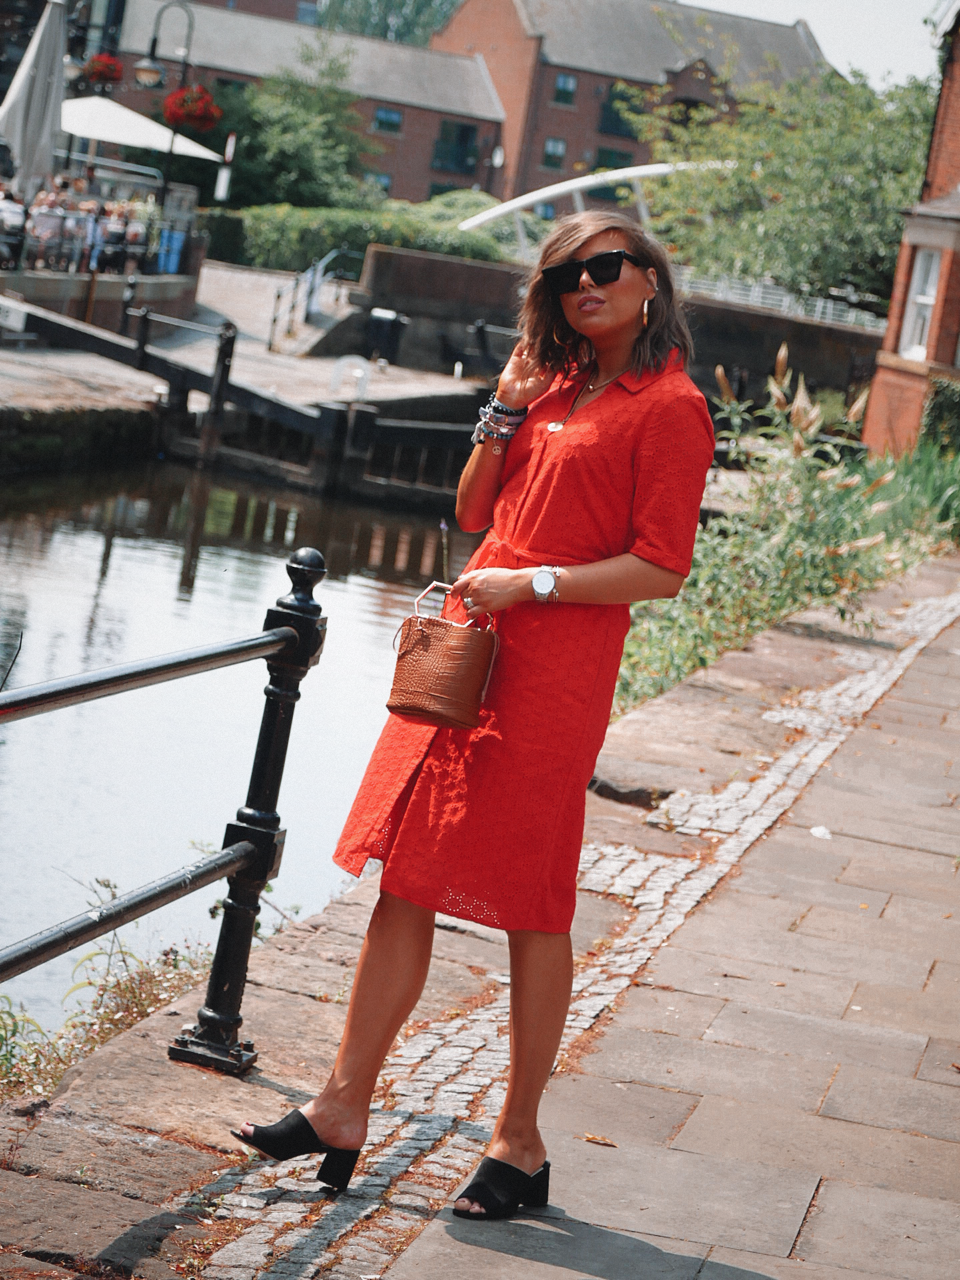 manchester blogger, manchester fashion bloggers, fashion blogger, straw bags, summer looks, mini dresses, oversized 